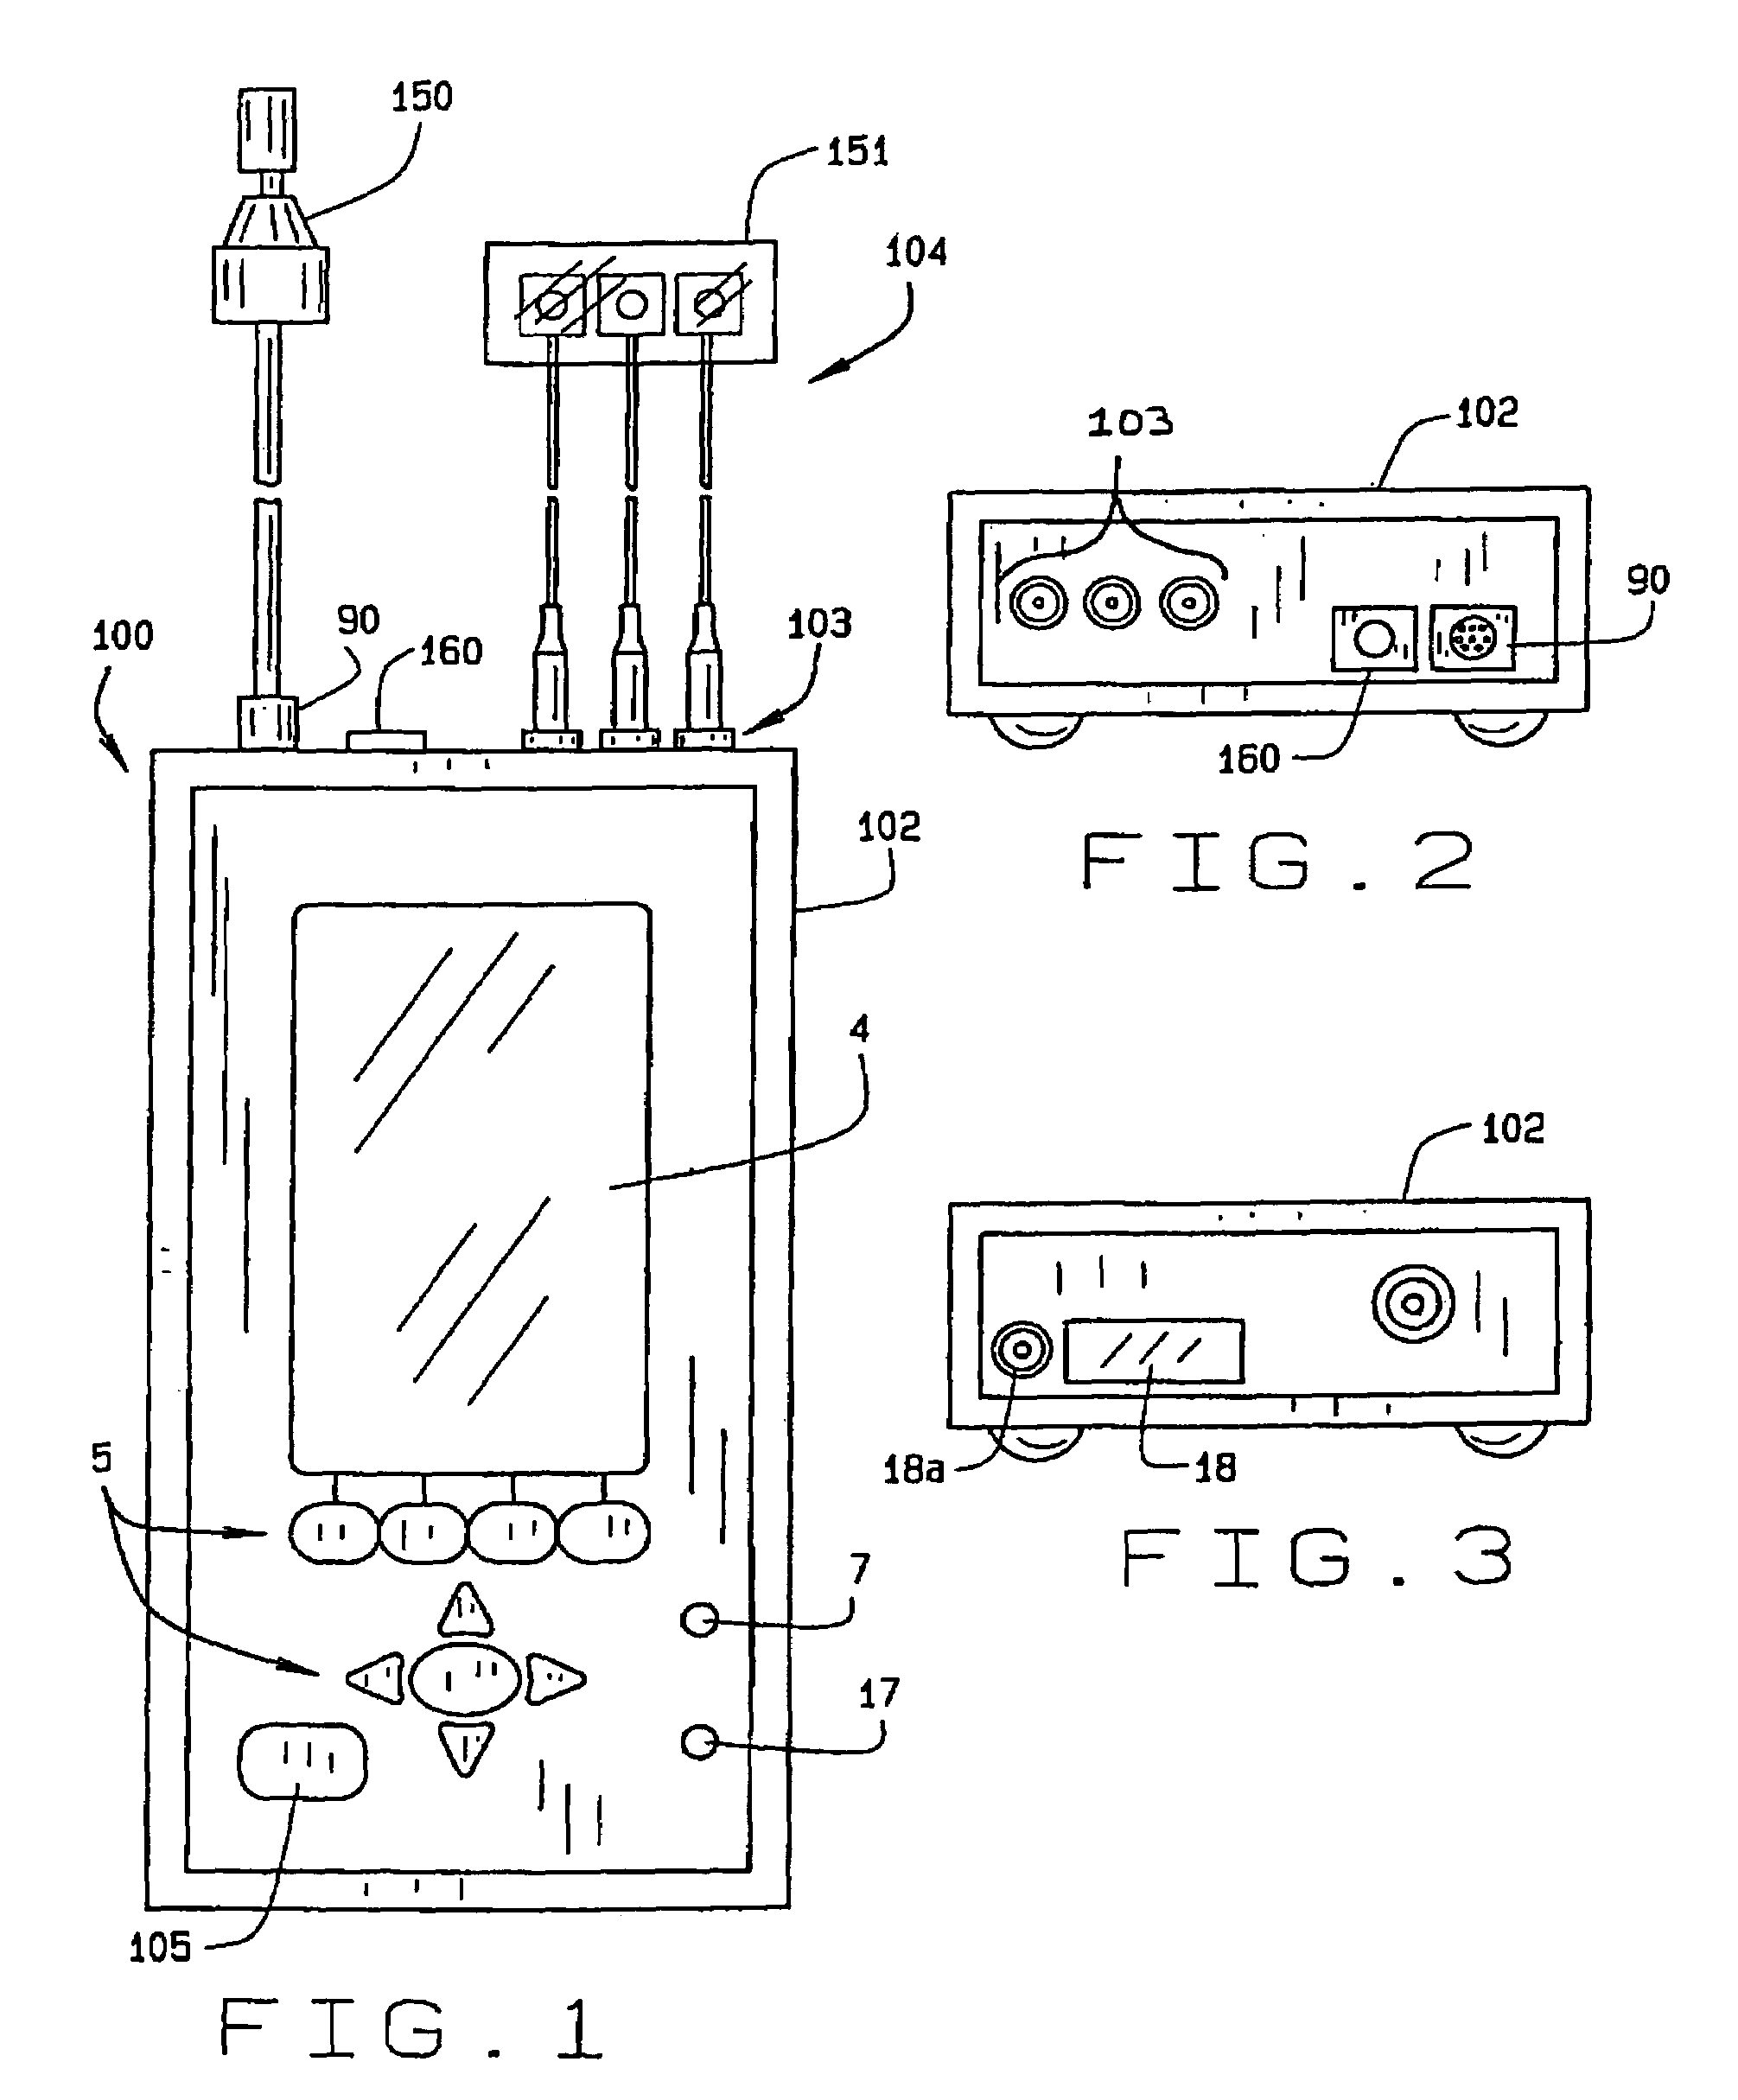 Handheld audiometric device and method of testing hearing